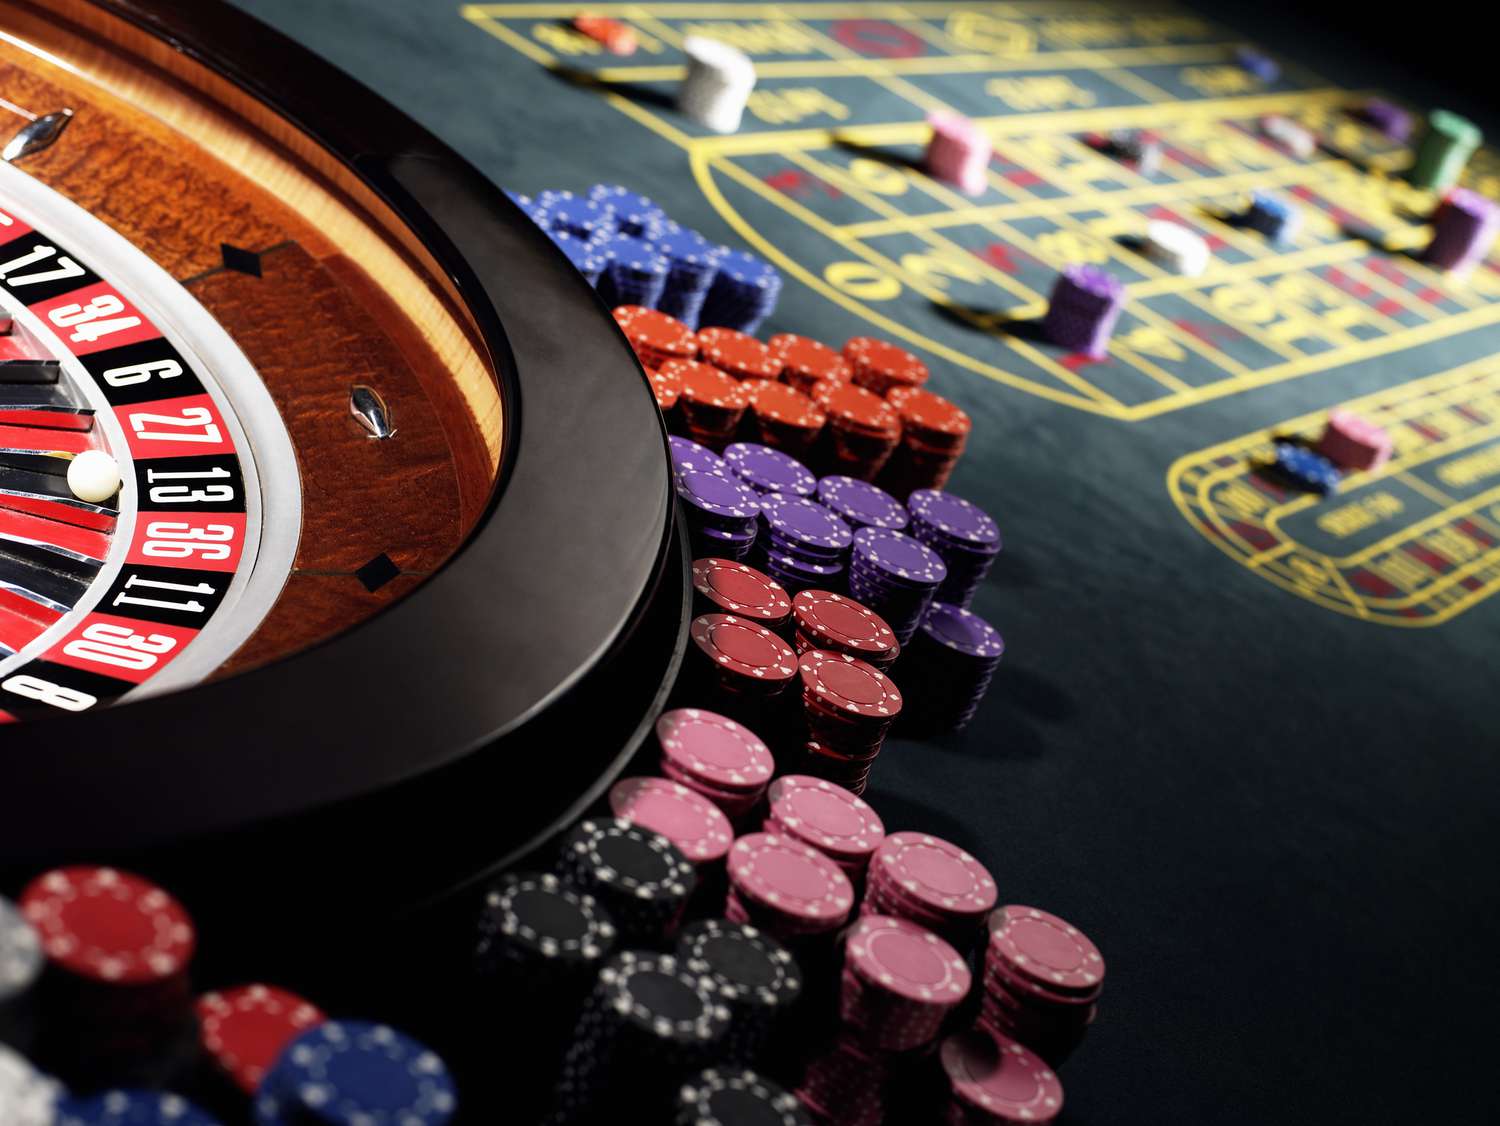 Are you planning your next high rolling outing? Here are the most well received casinos in Singapore as handpicked by experts.